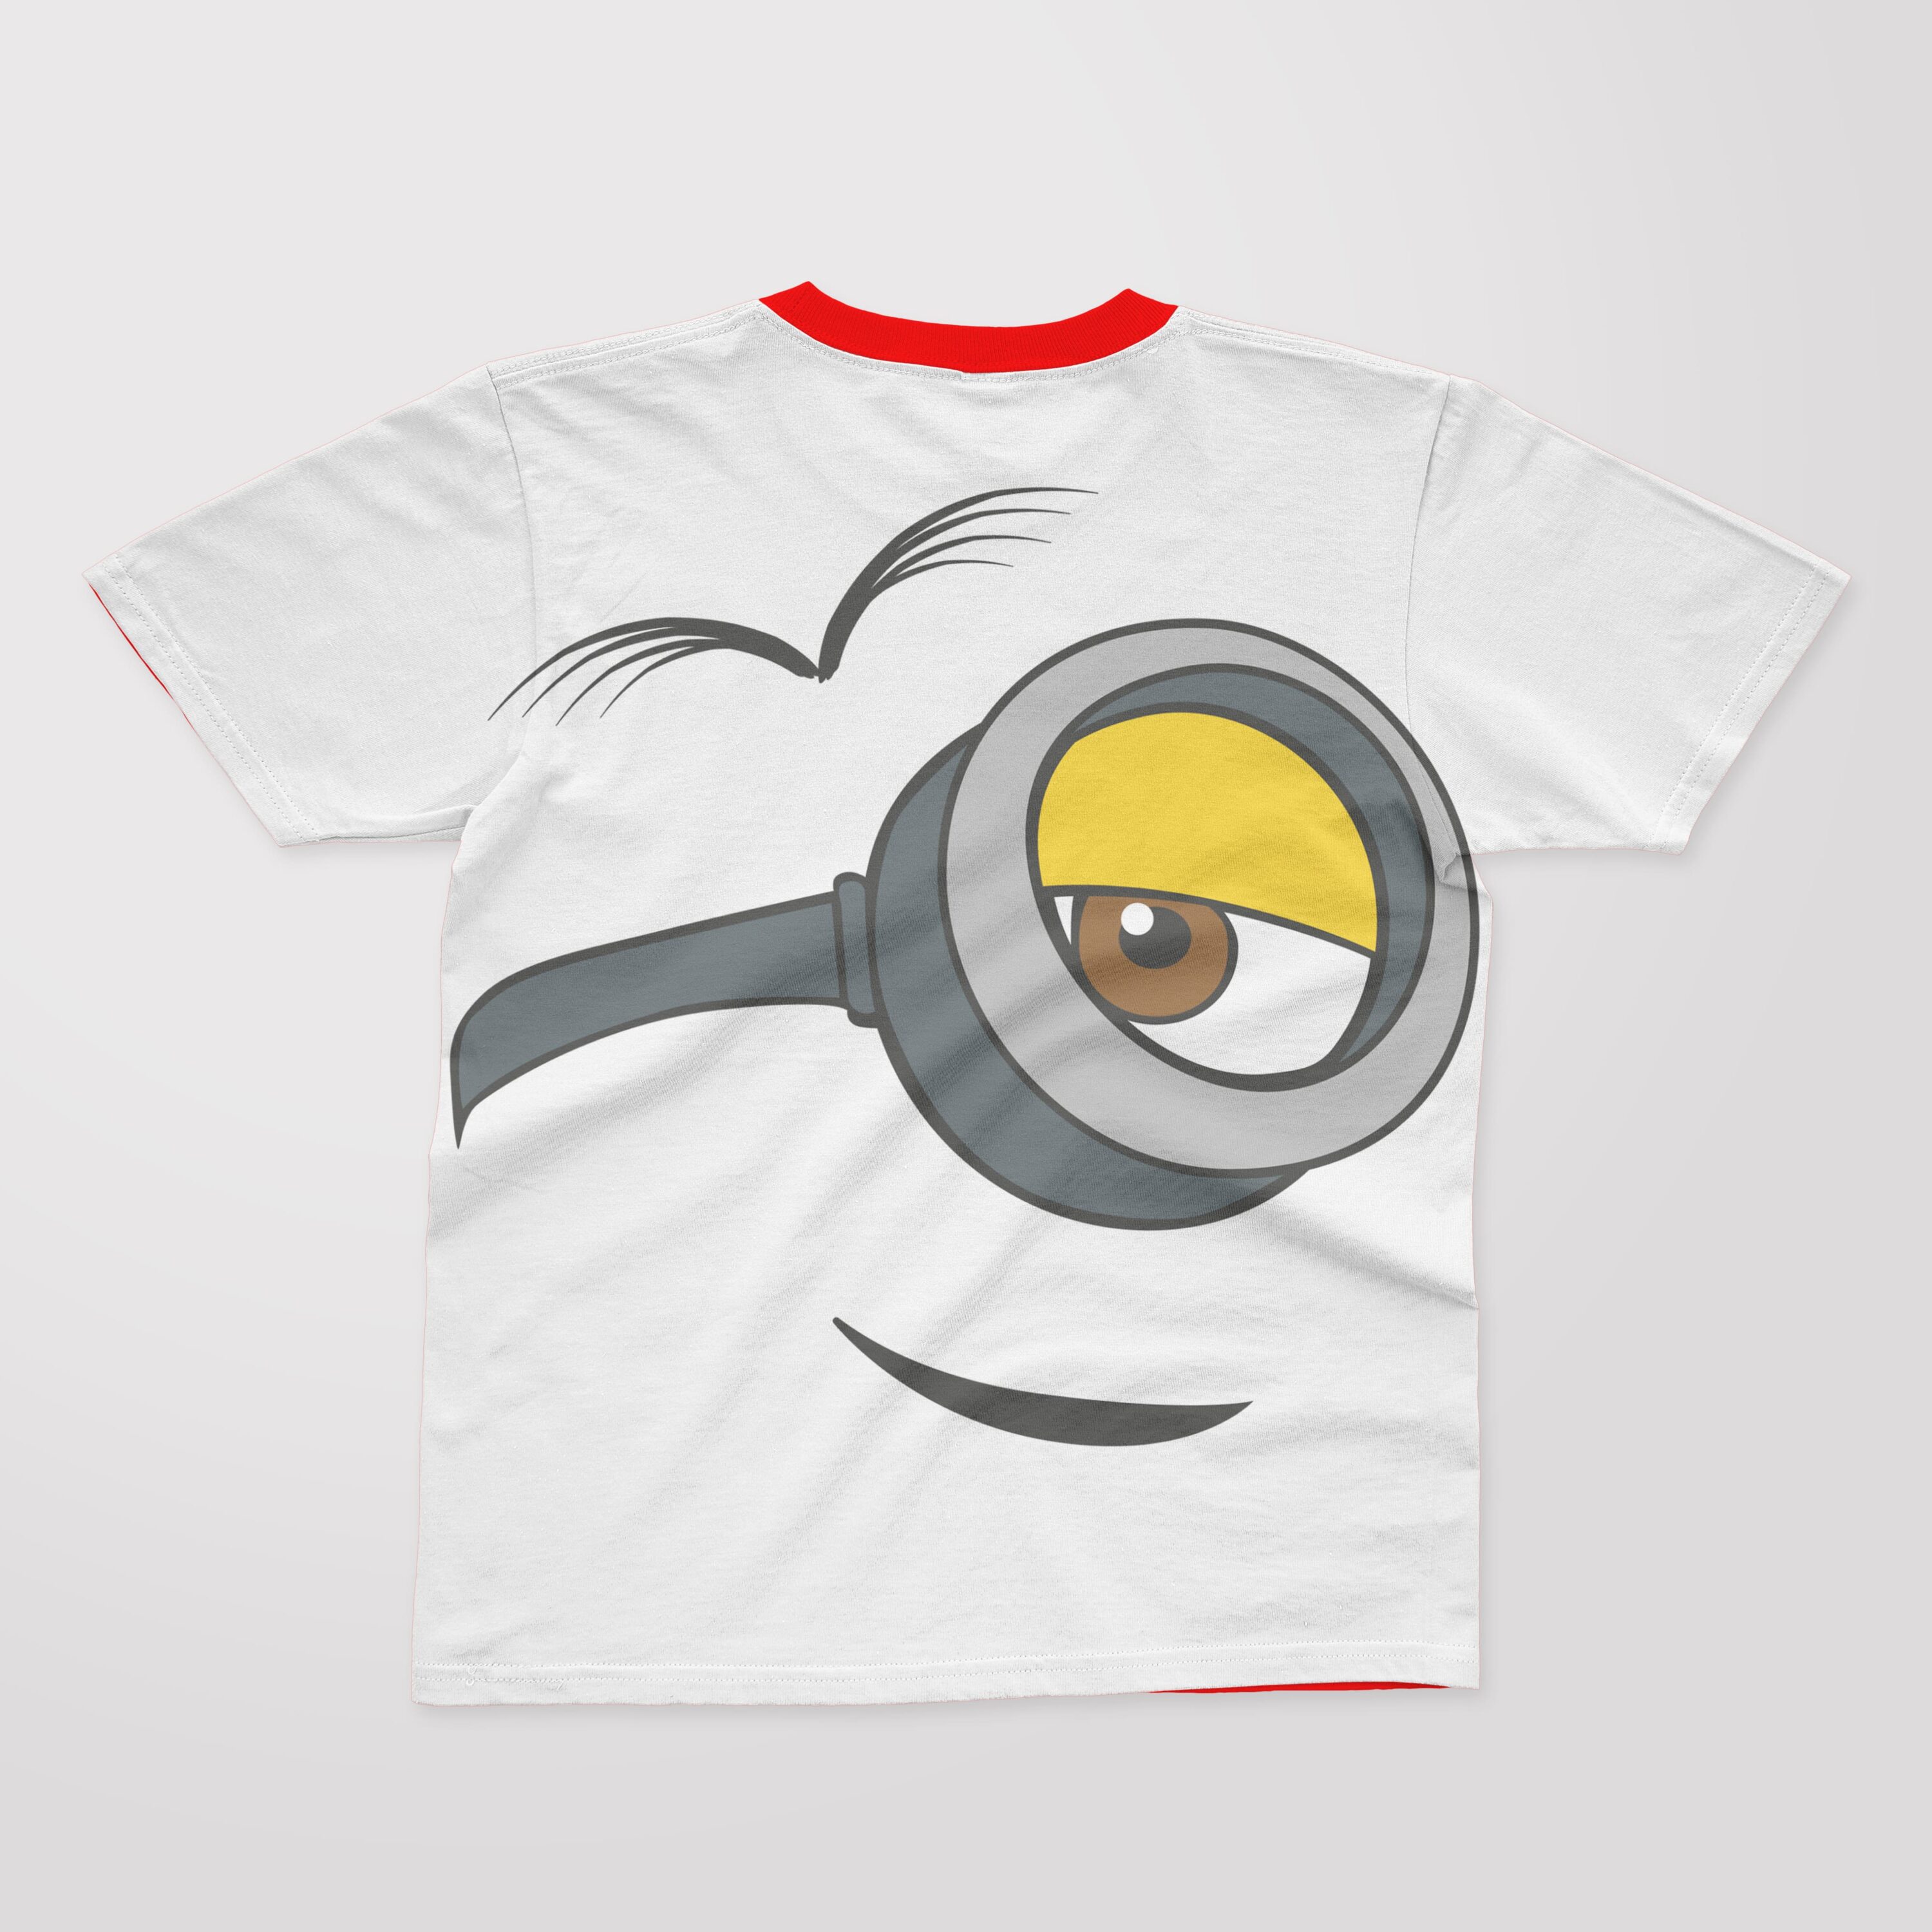 White T-shirt with a red collar and a face of a grinning minion.